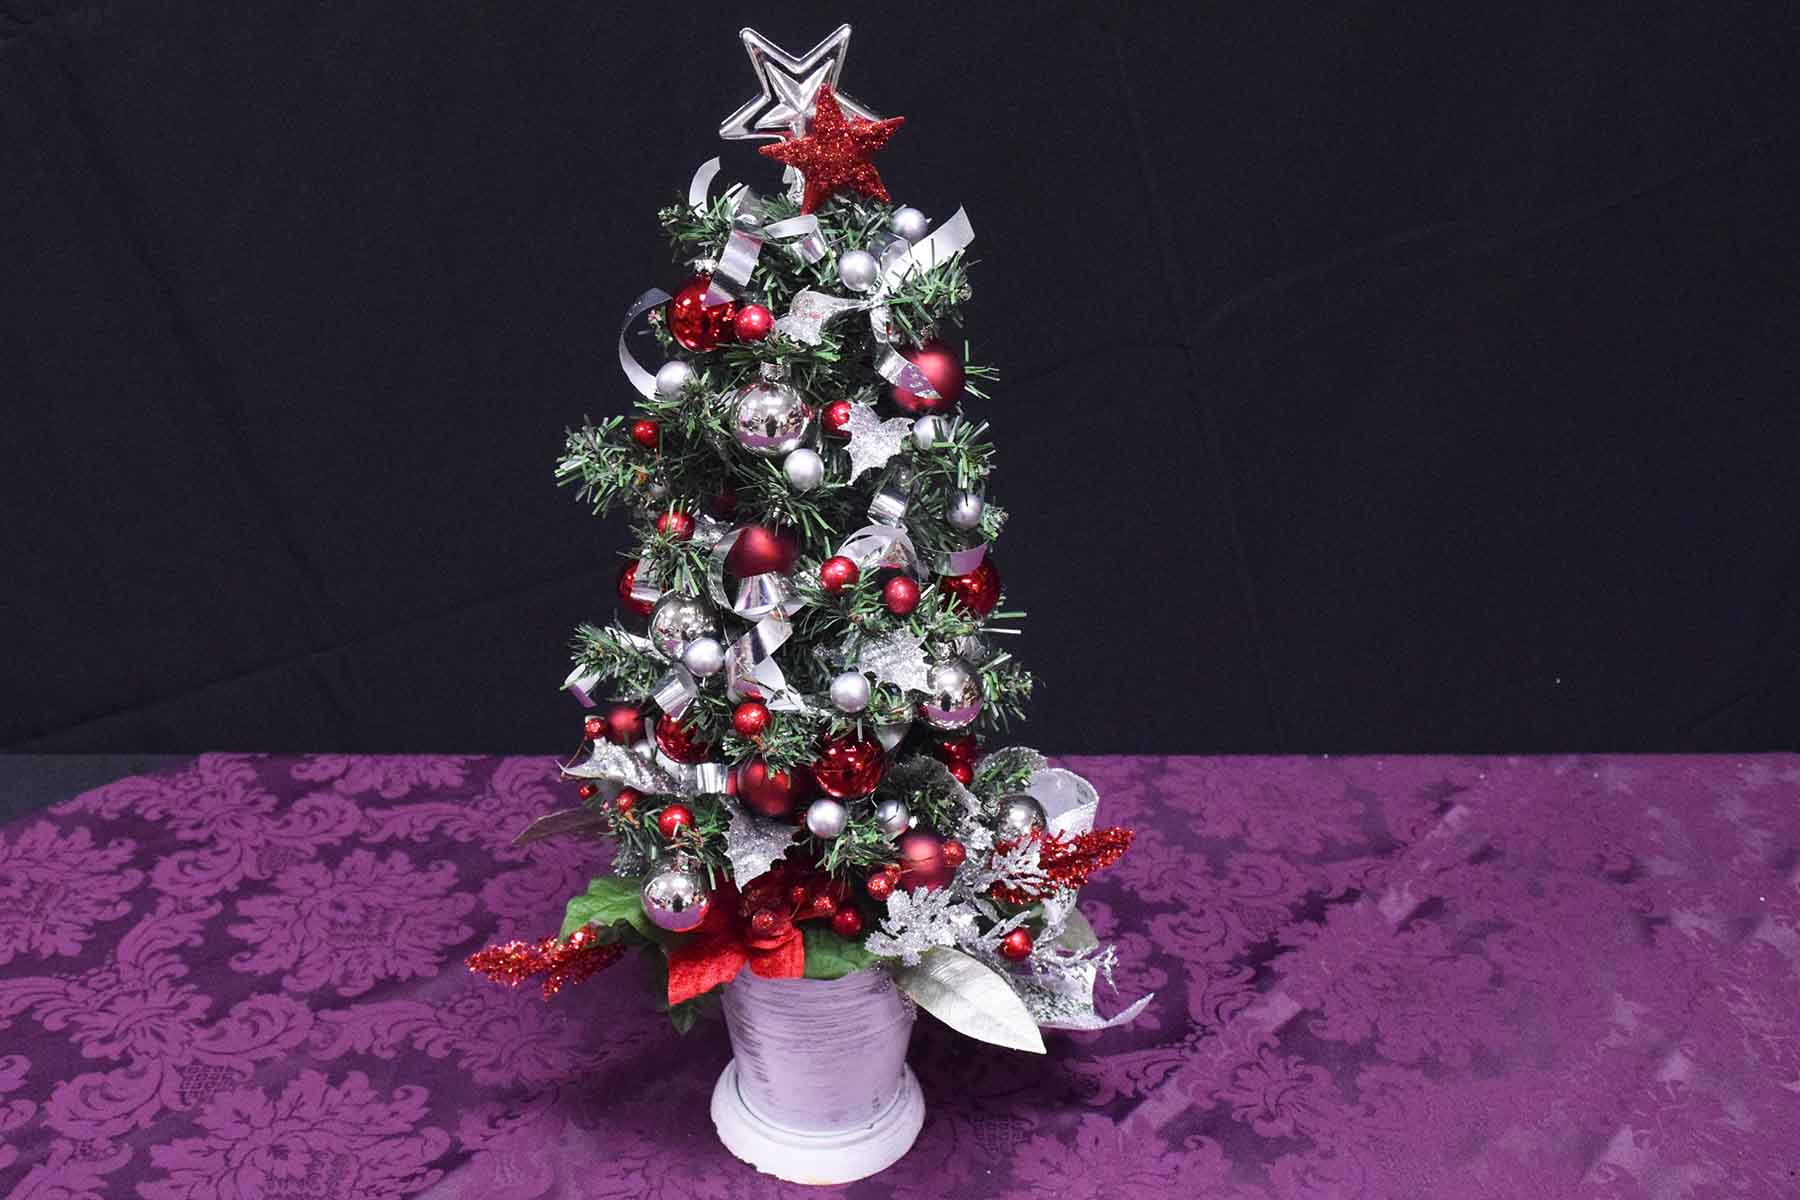 C15_--_Tree_with_silver_and_red_balls_in_white_base.jpg